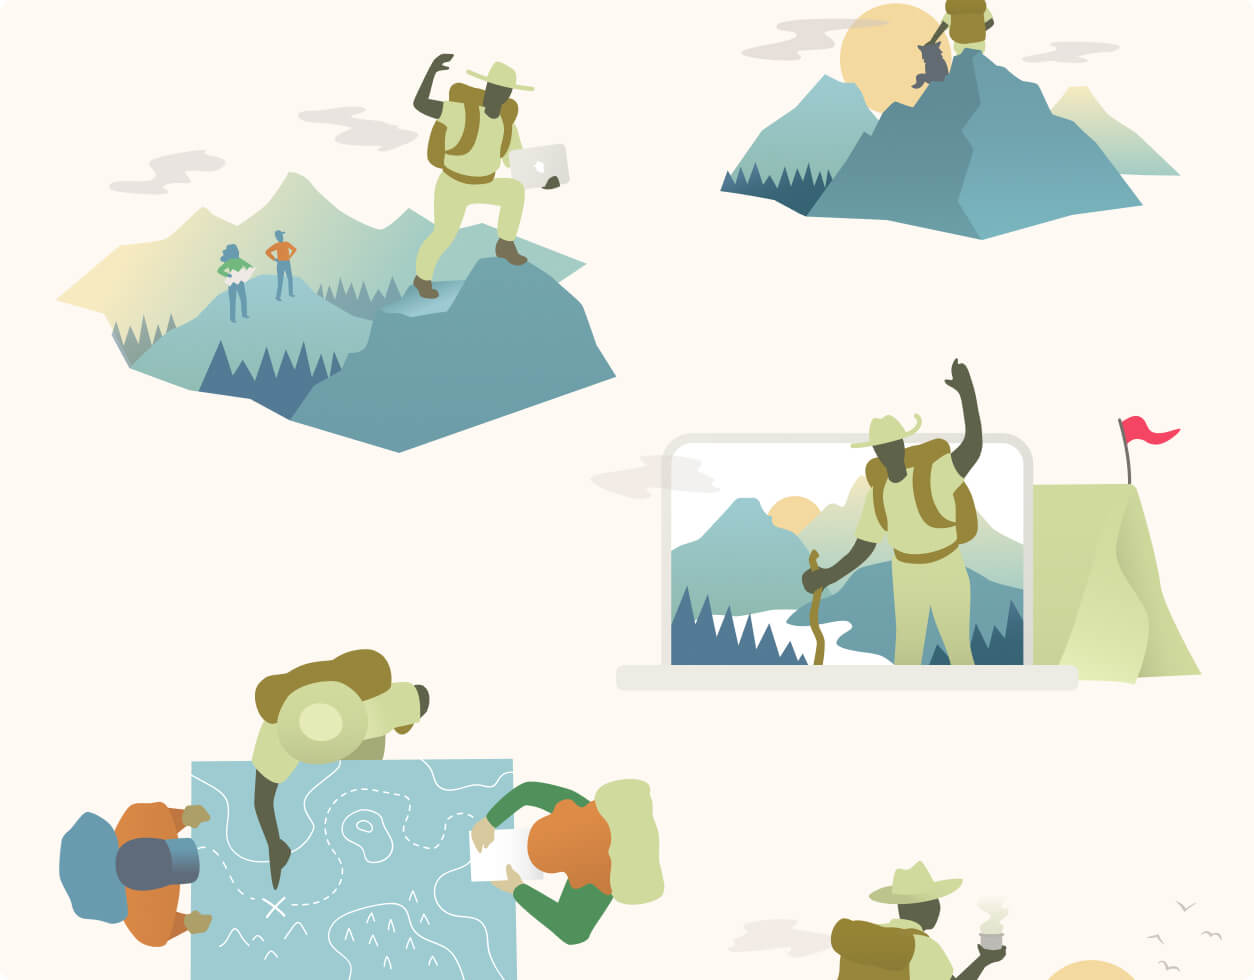 example illustrations from the Adventure of Inventing project showing the guide/explorer character helping hikers in various situations